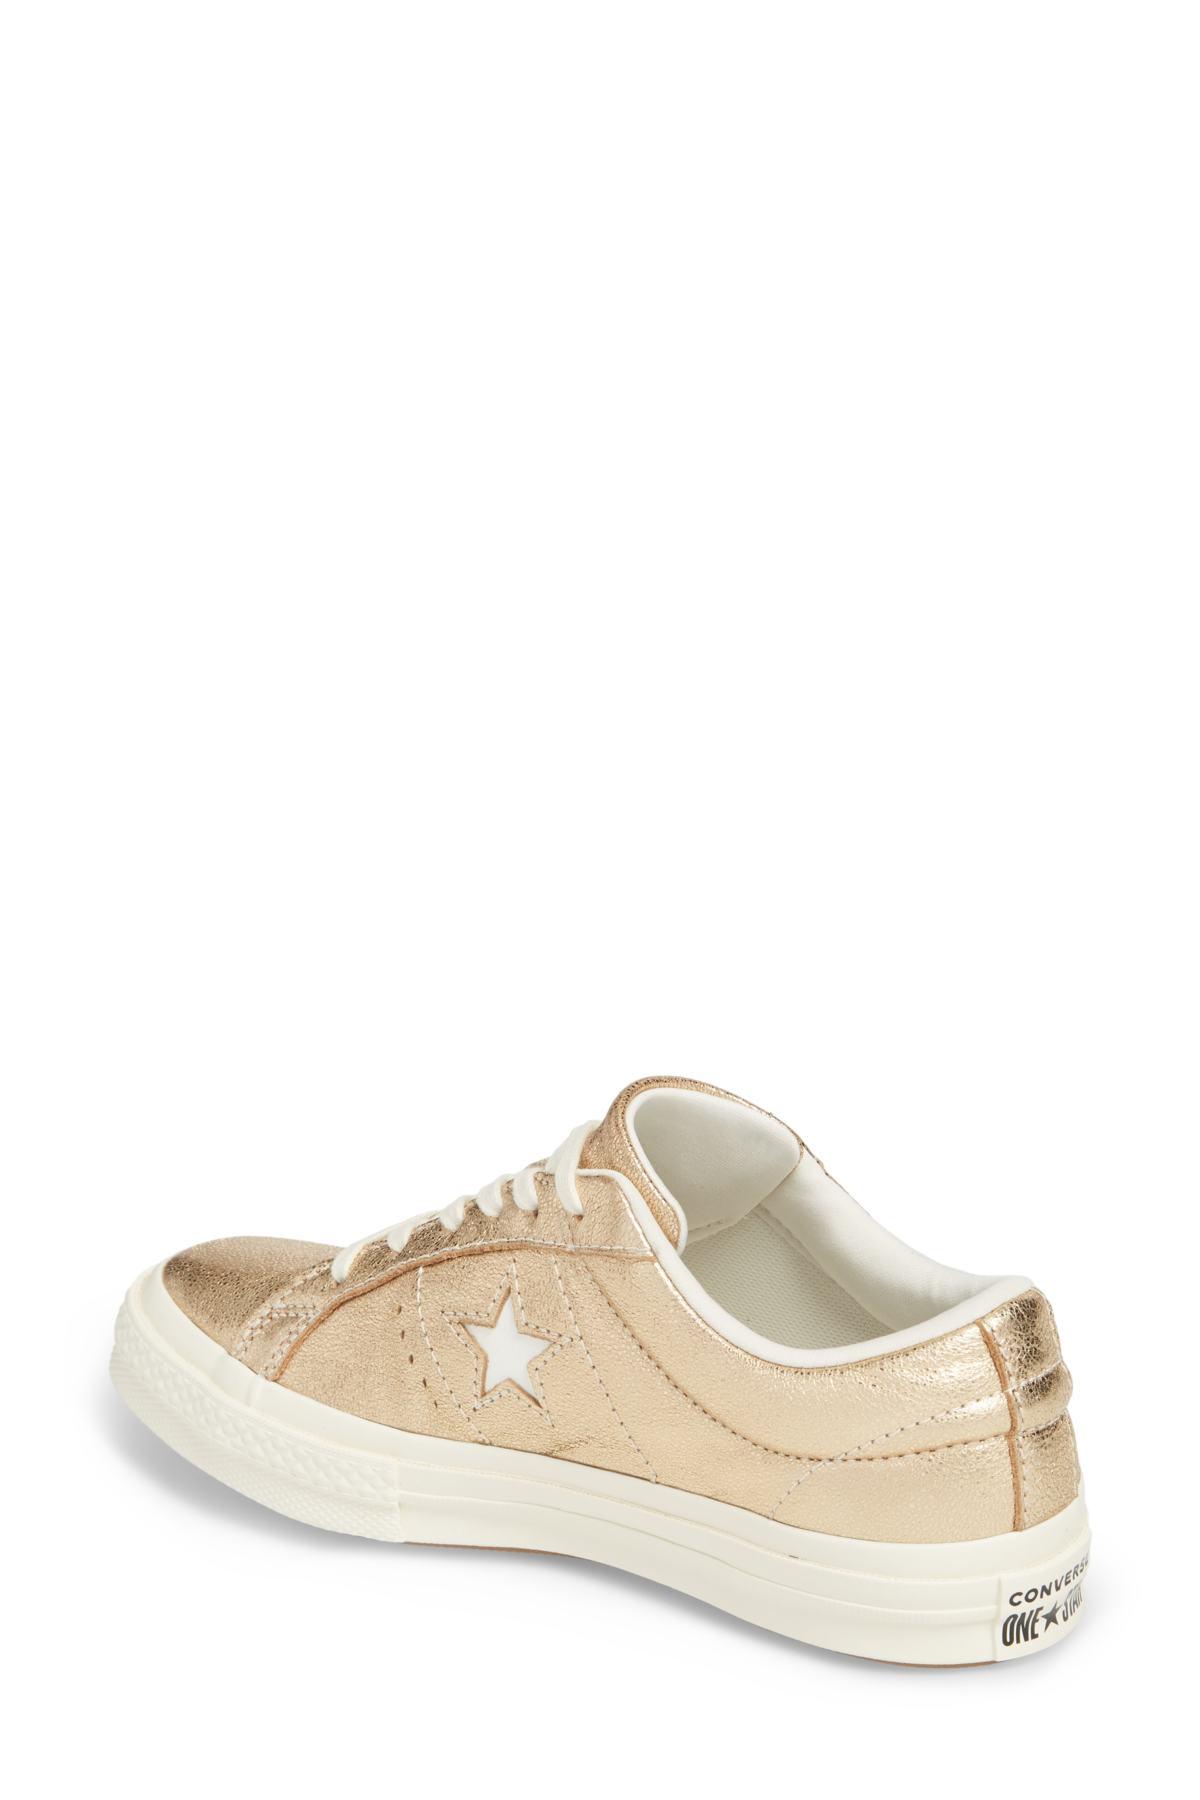 Converse Leather One Star Ox Women's Shoes (trainers) In Gold in Metallic |  Lyst